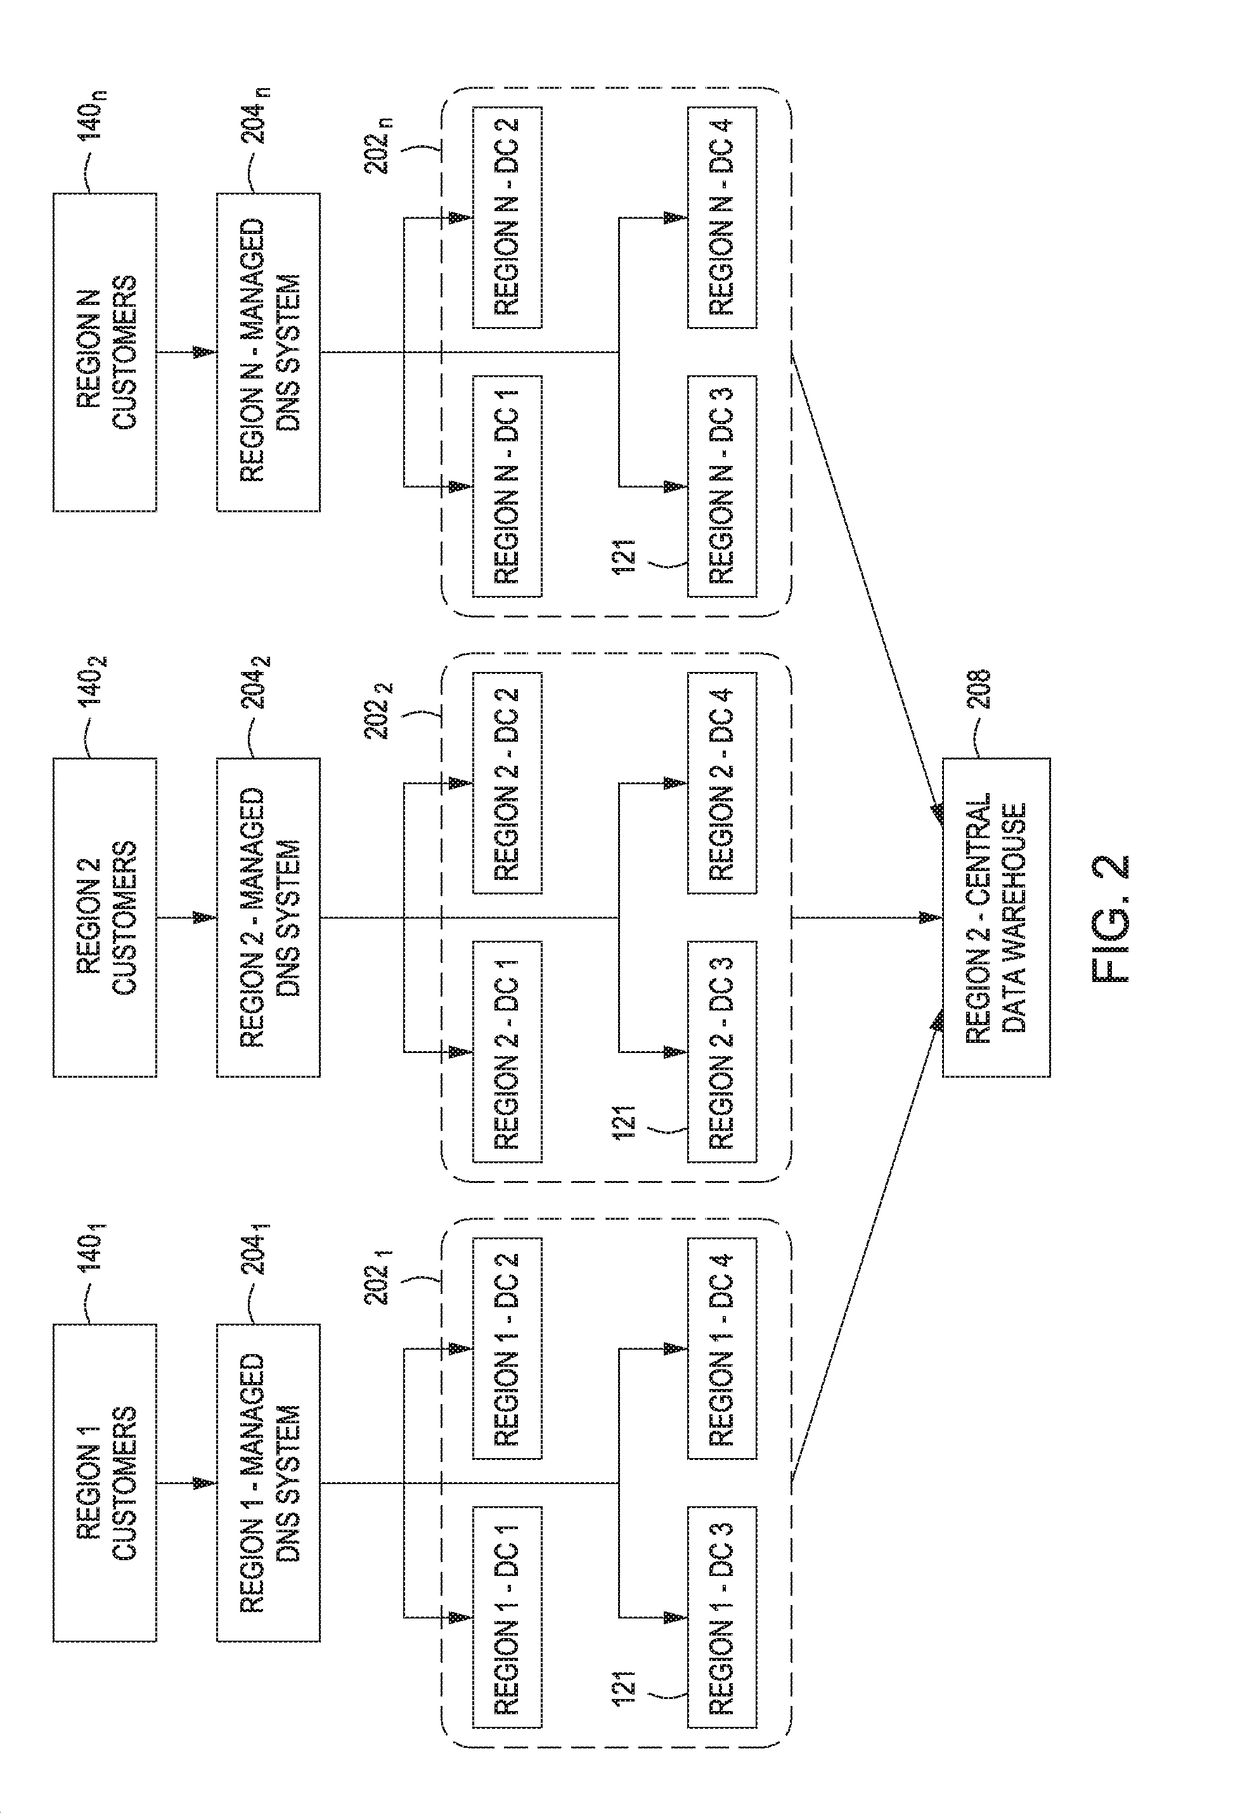 Systems and methods for regional data storage and data anonymization